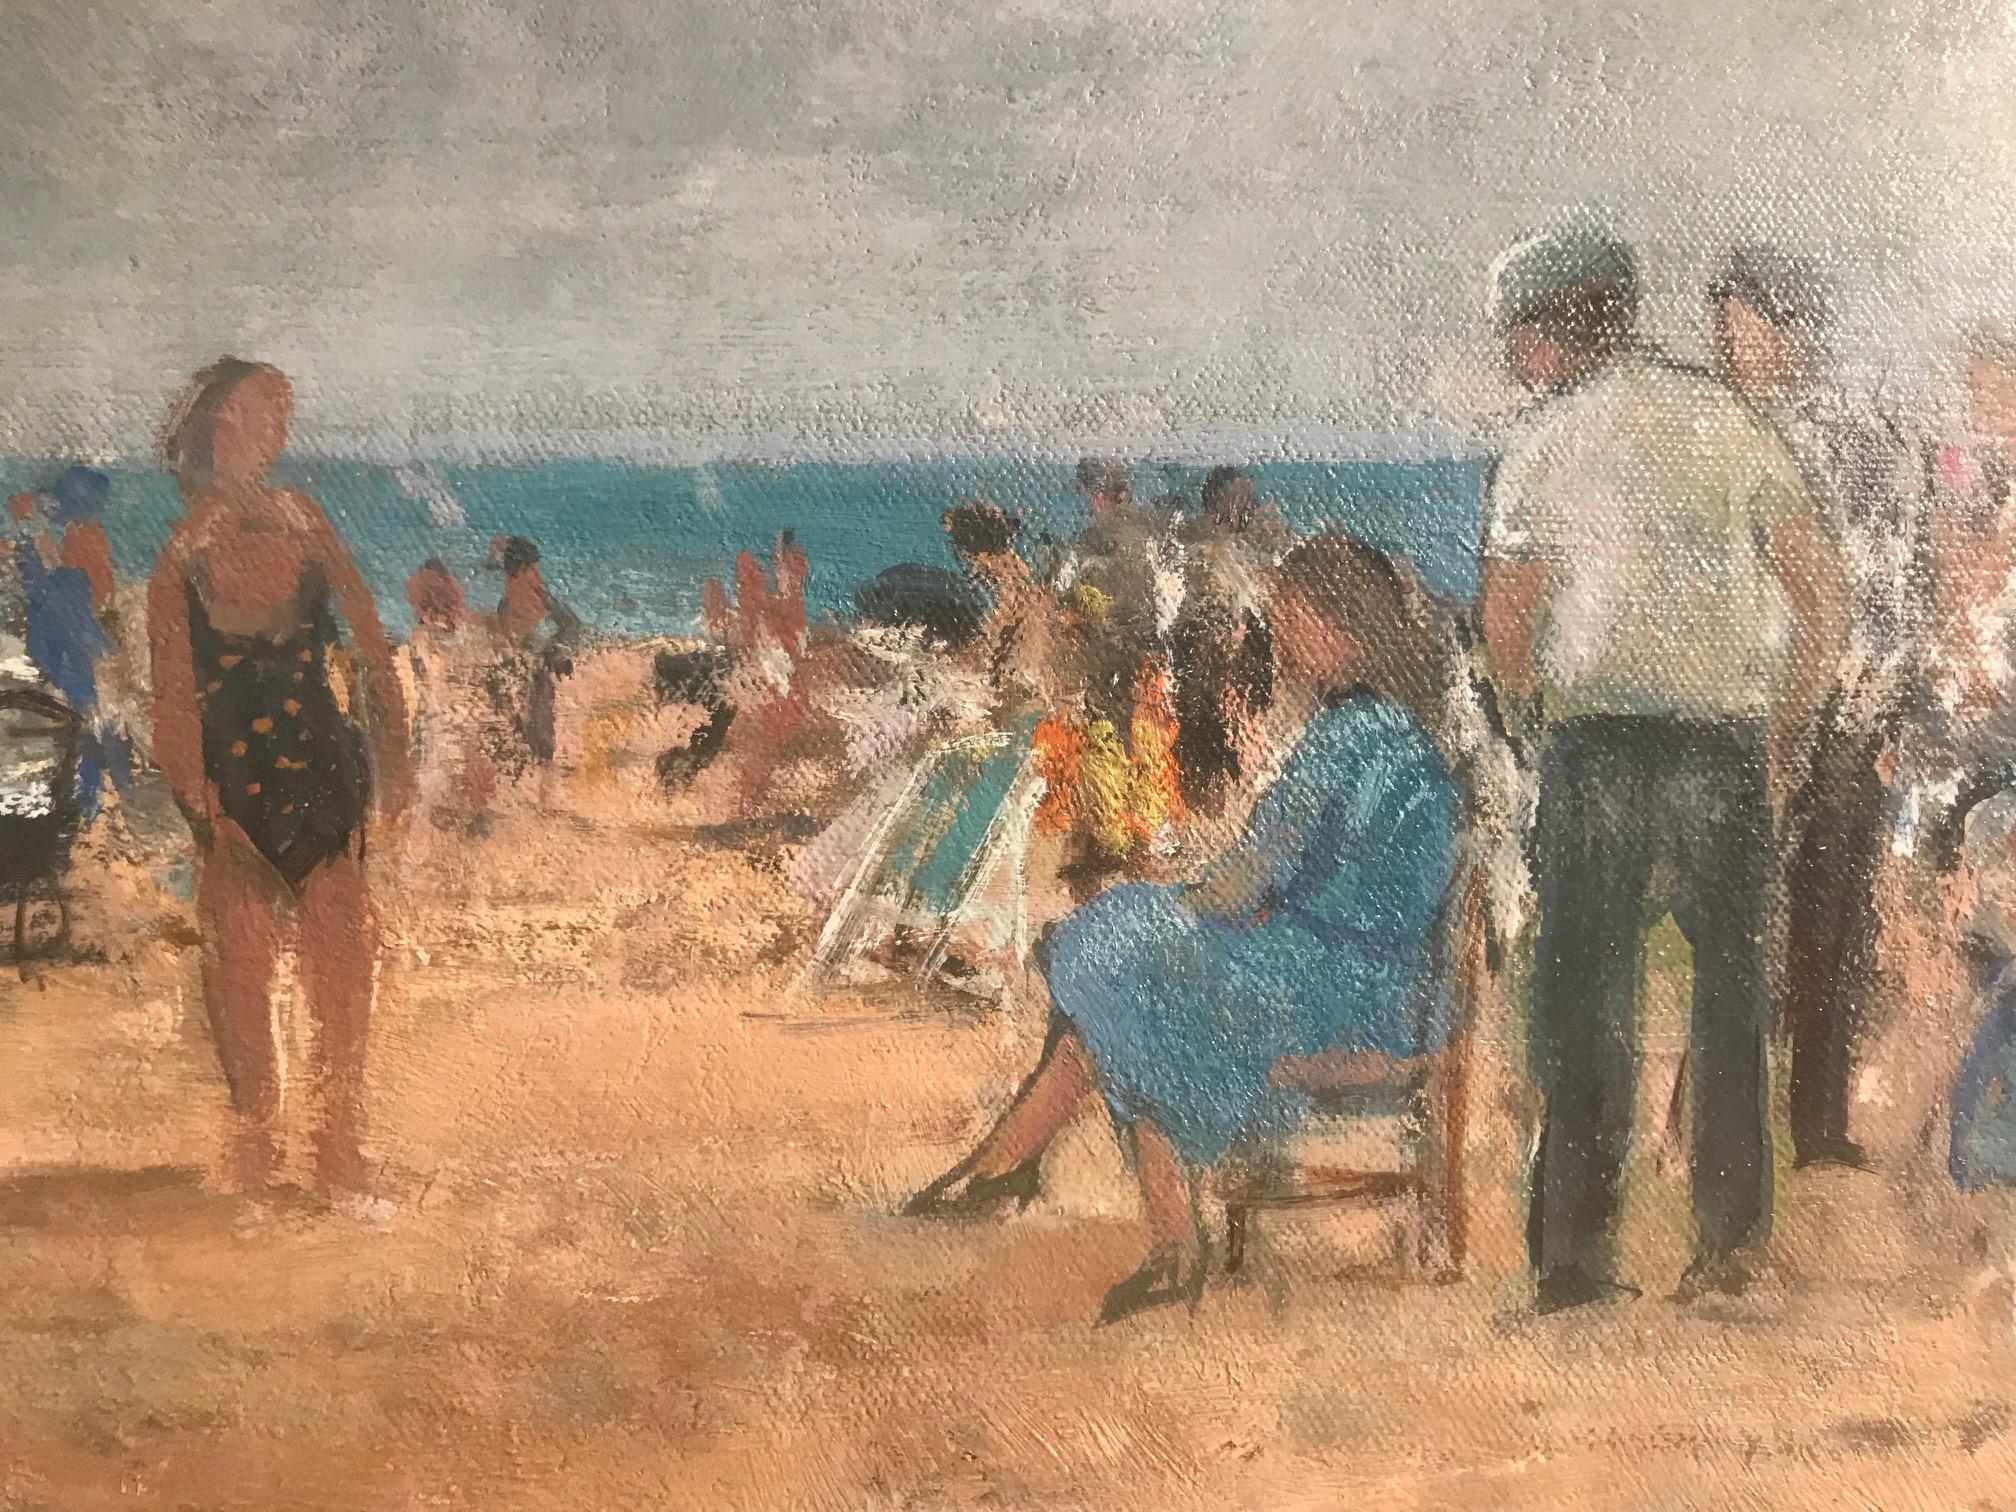 ‘Un Plage, Normadie’ is very typical of Gall’s work. He would love painting women usually engaged in typically at that time, feminine activities.
His impressionistic style is very loose and endures his unique personality. 
‘Un Plage, Normadie’ is a